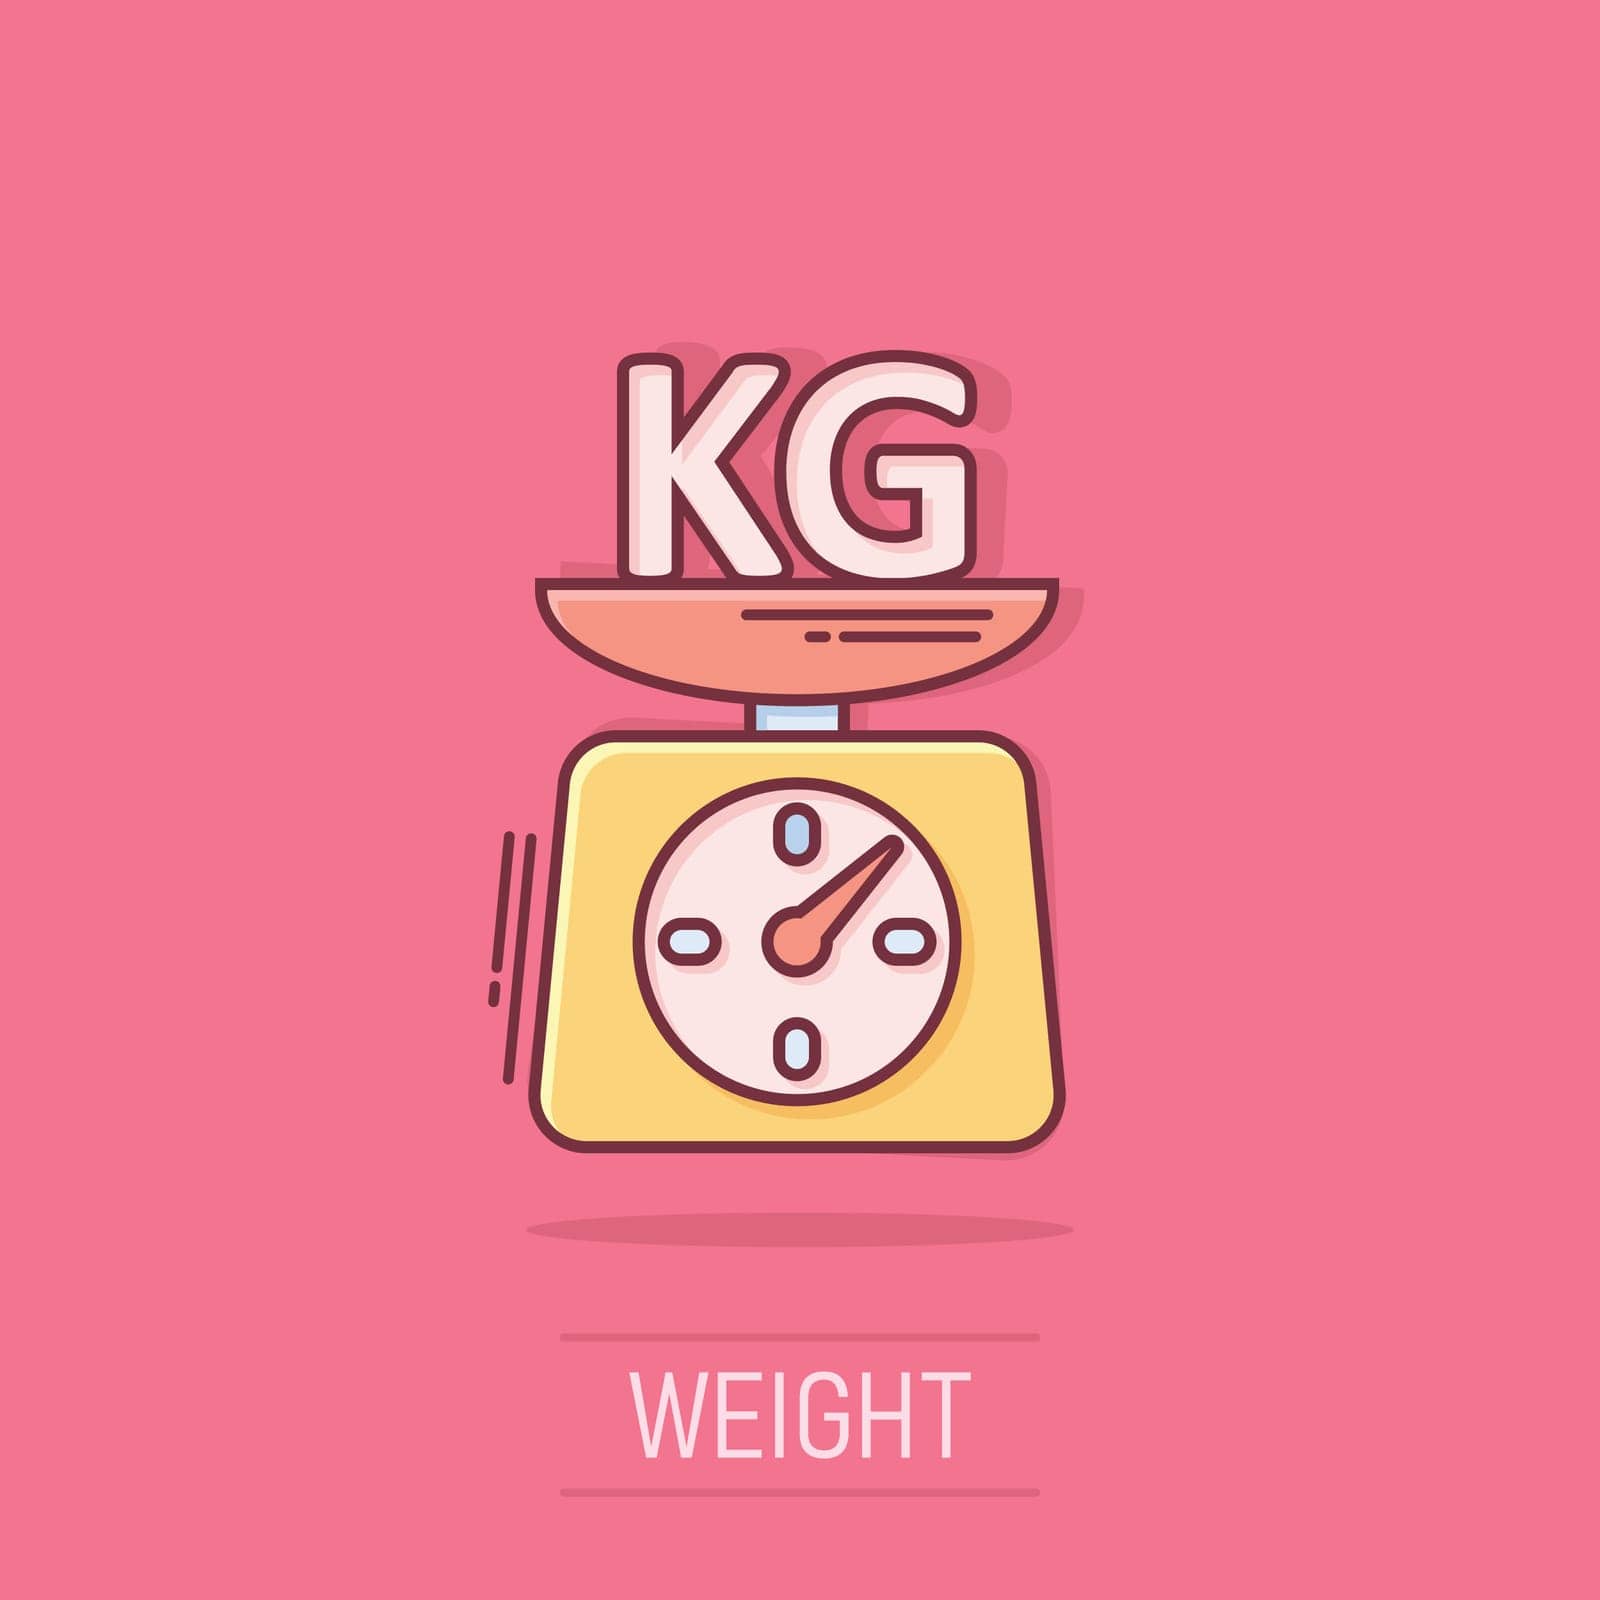 Scale icon in comic style. Kilogram dumbbell cartoon vector illustration on white isolated background. Gym splash effect business concept. by LysenkoA